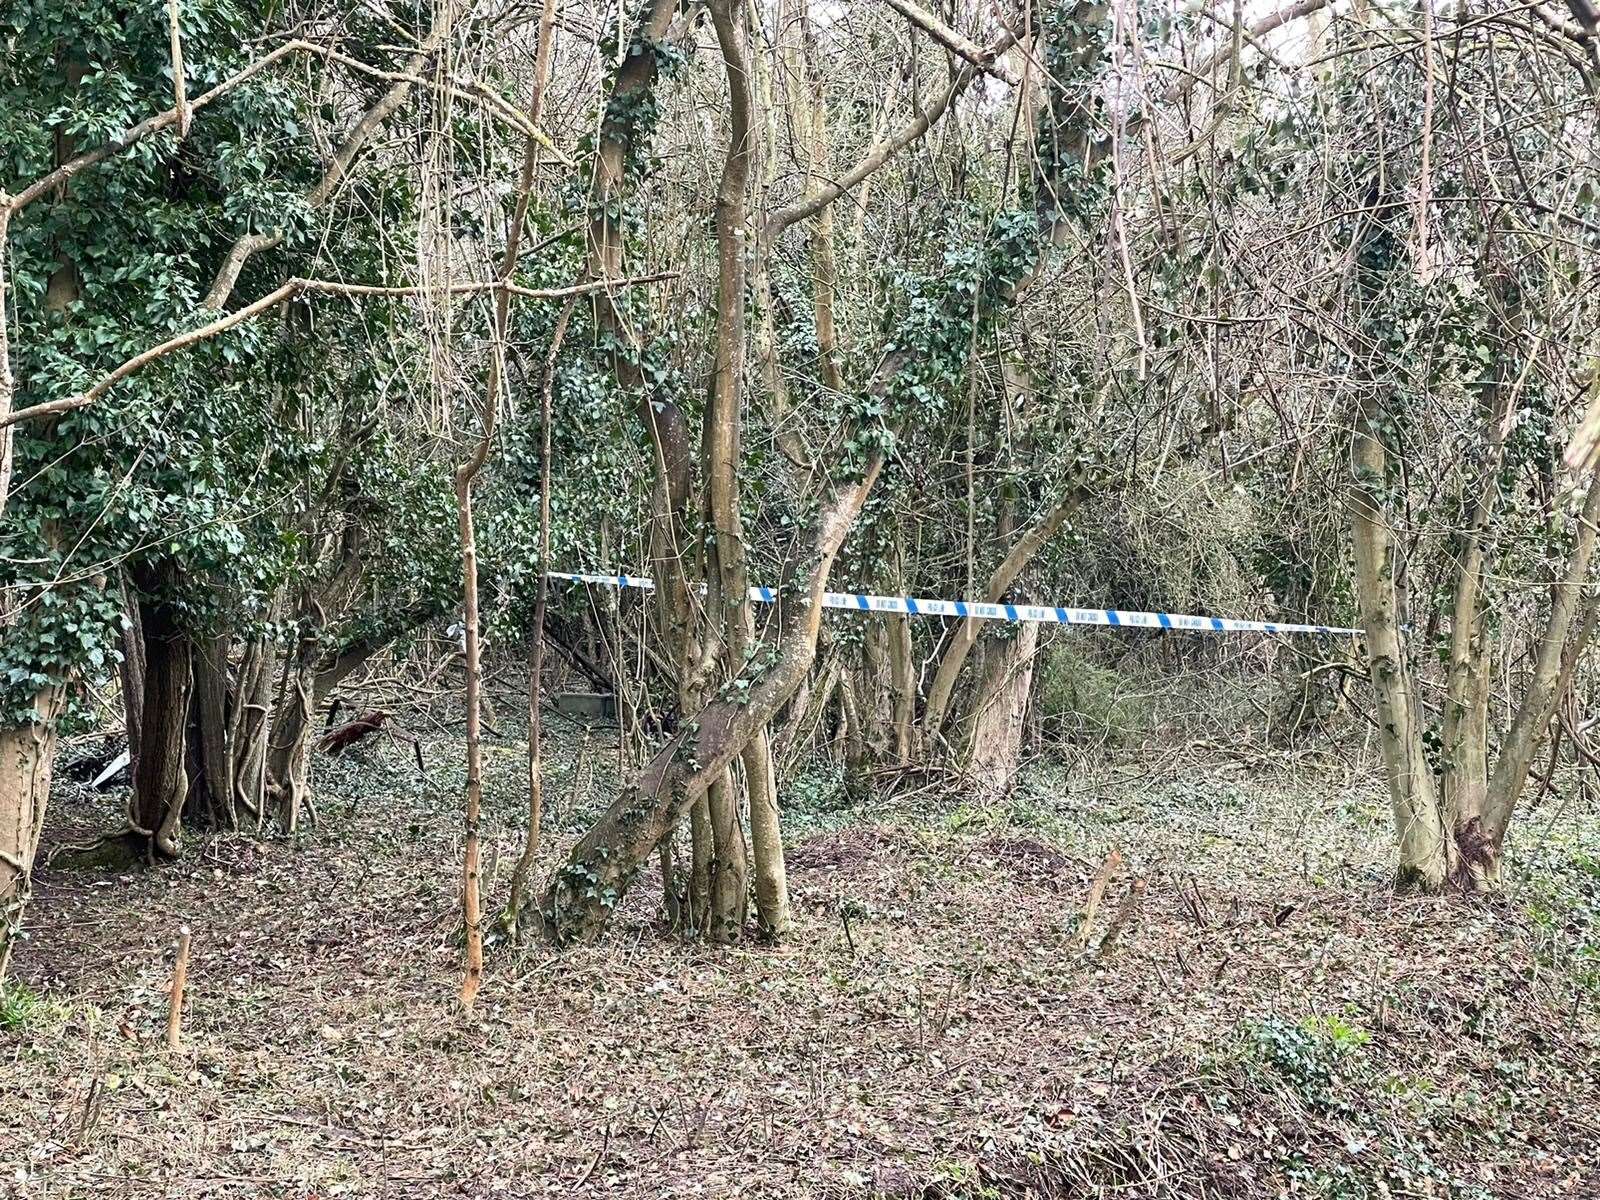 Police cordoned off an area of woodland yesterday. Picture: UKNIP